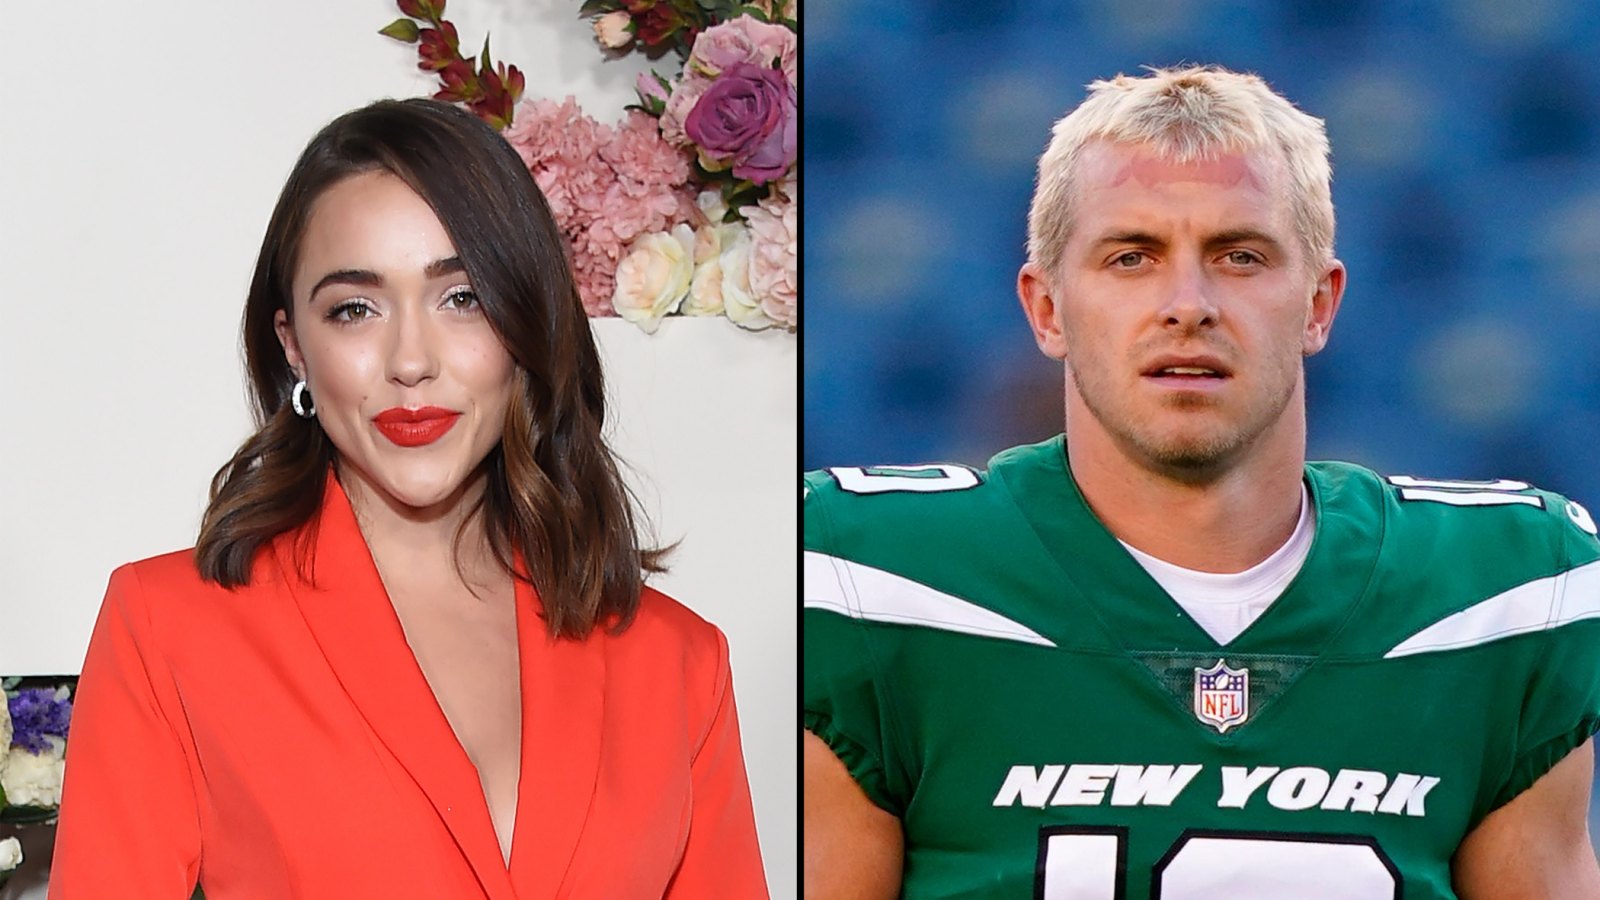 Sophia Culpo Confirms Split From NFL Star Braxton Berrios Split After 2 Years of Dating